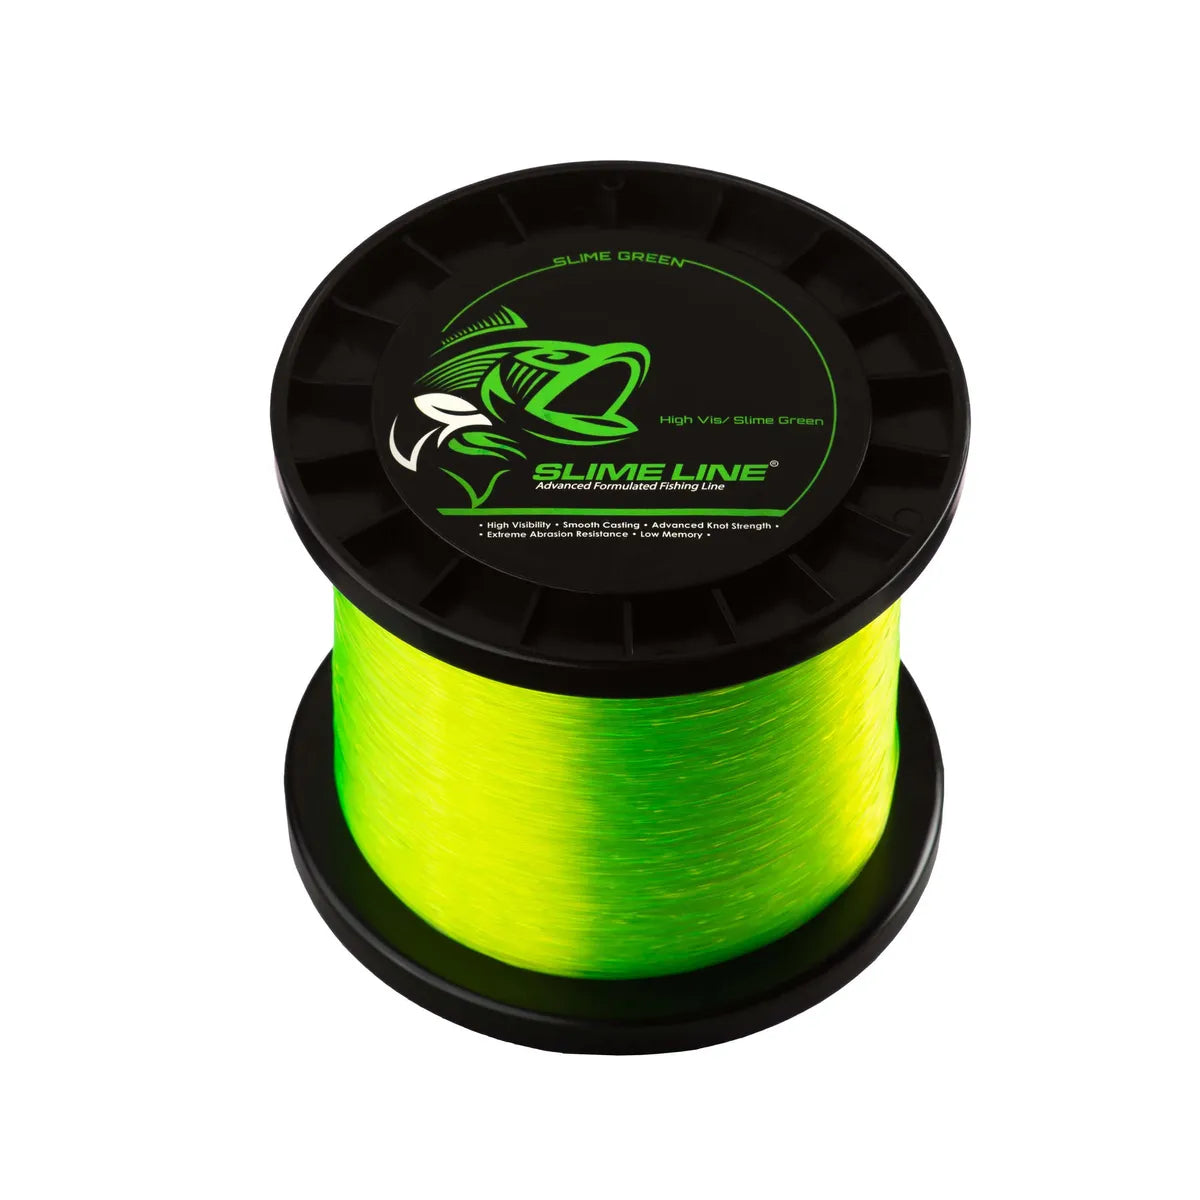 Shop Fishing Material Online, Commercial Fishing Supplies, Monofilament